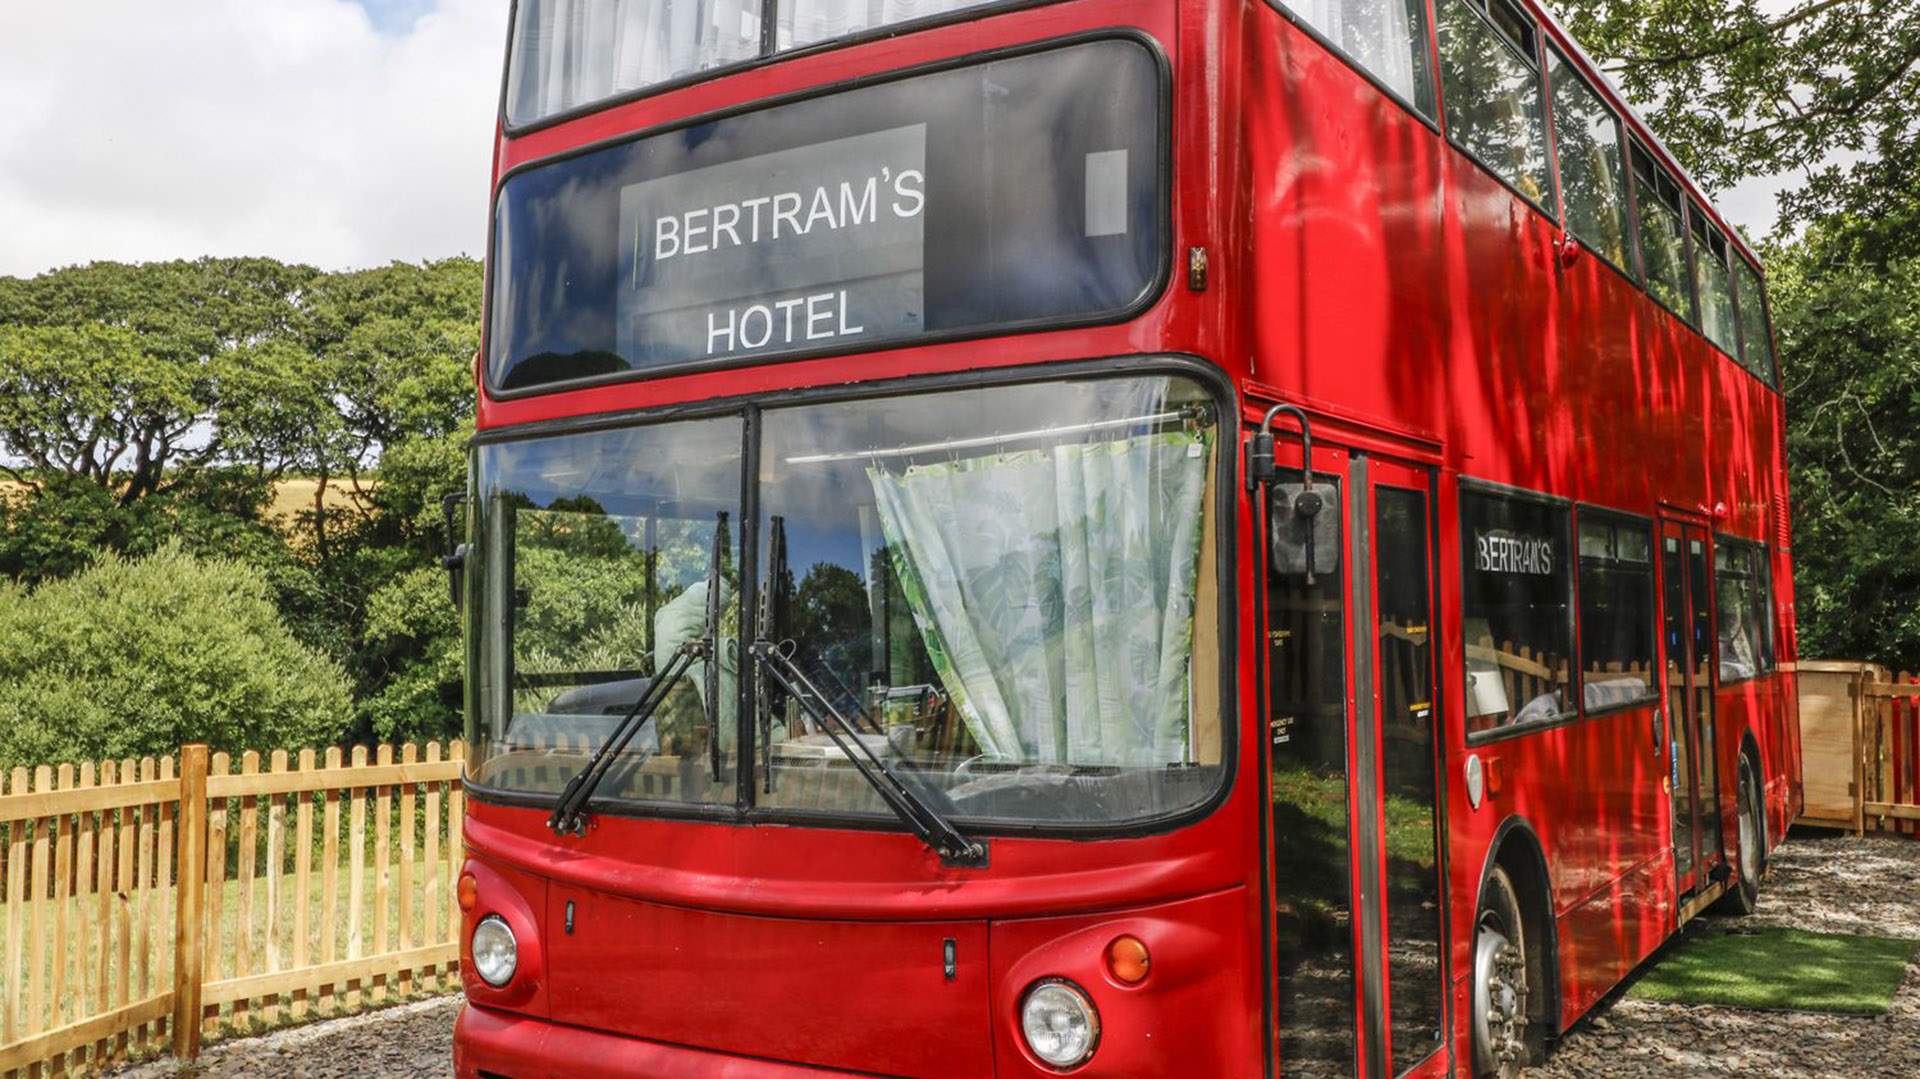 You Can Now Stay In an Agatha Christie-Inspired Hotel Inside a Double Decker Bus